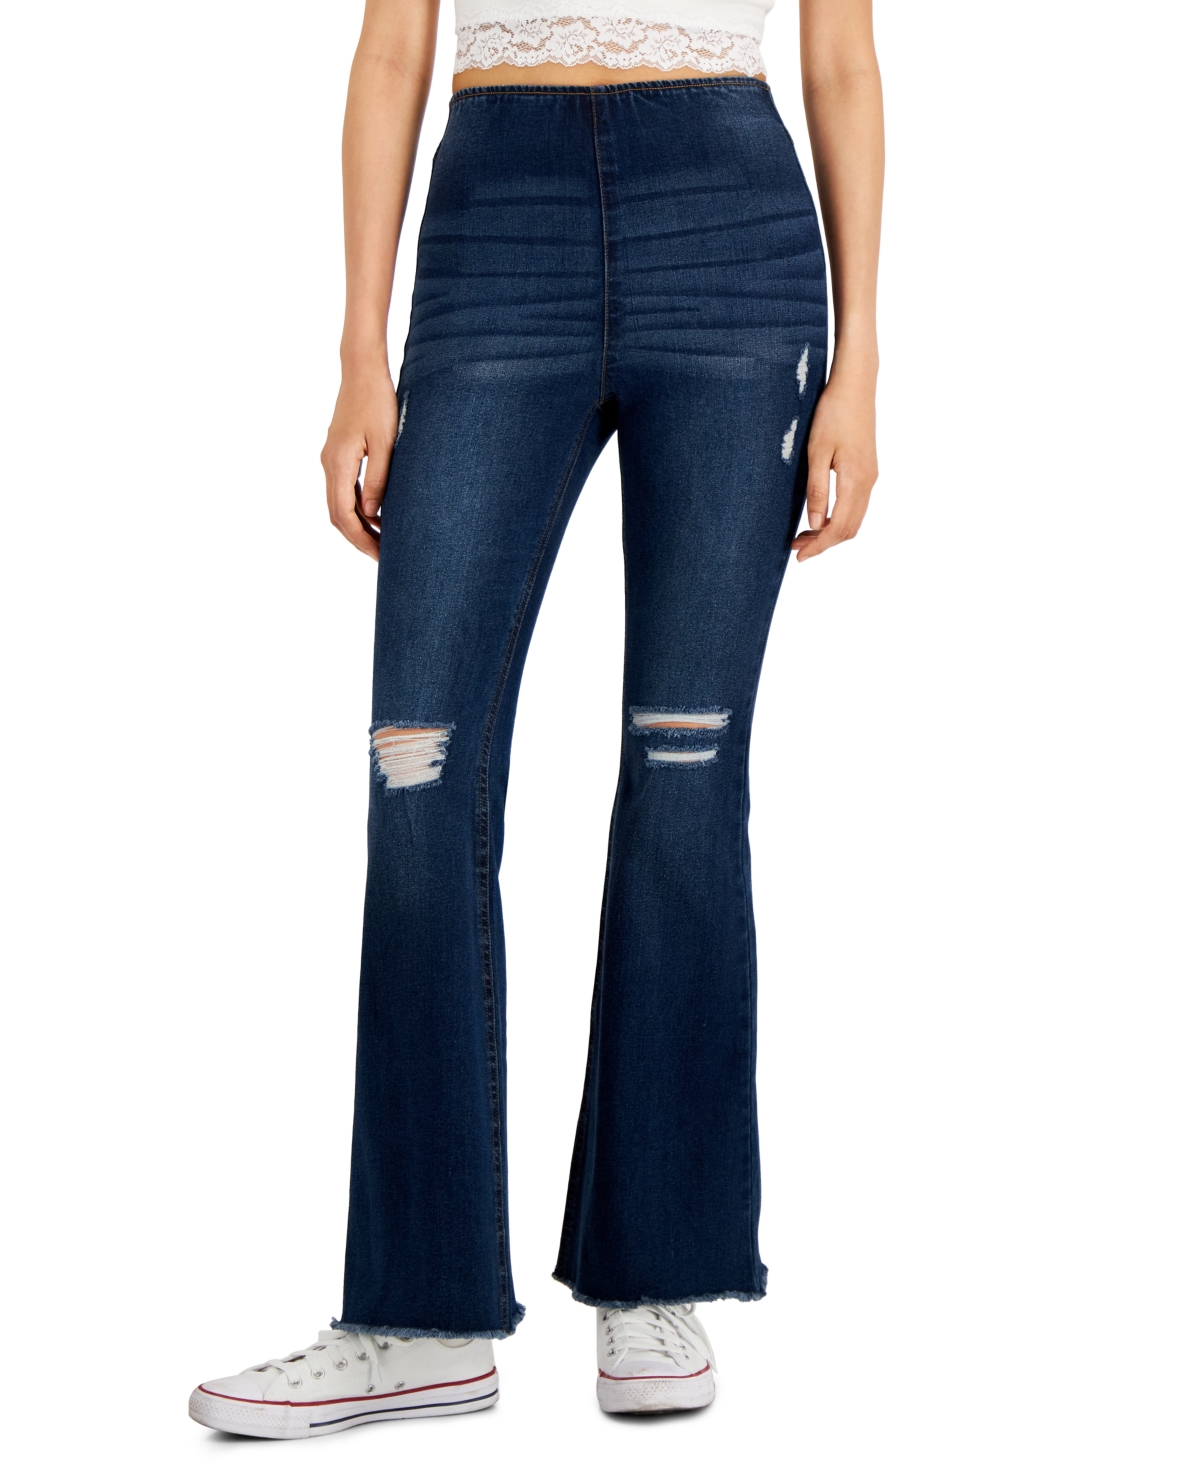 TINSELTOWN JUNIORS' HIGH RISE PULL-ON FLARE-LEG JEANS